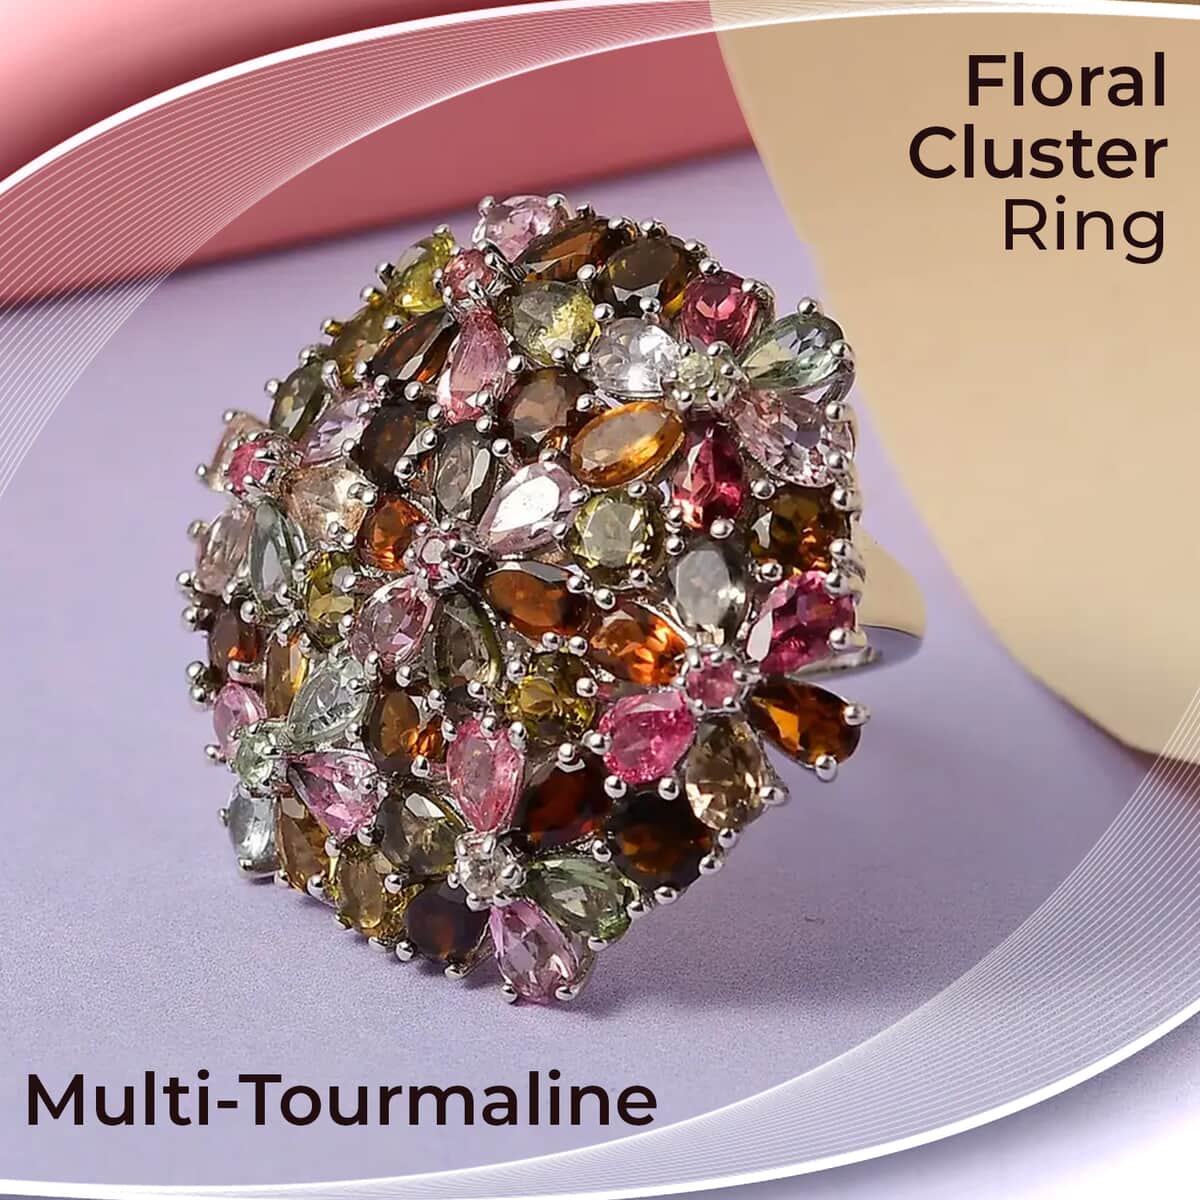 Multi-Tourmaline Floral Ring, Multi Tourmaline Ring, Floral Cluster Ring, Platinum Over Sterling Silver Ring 11.90 ctw (Size 8) image number 1